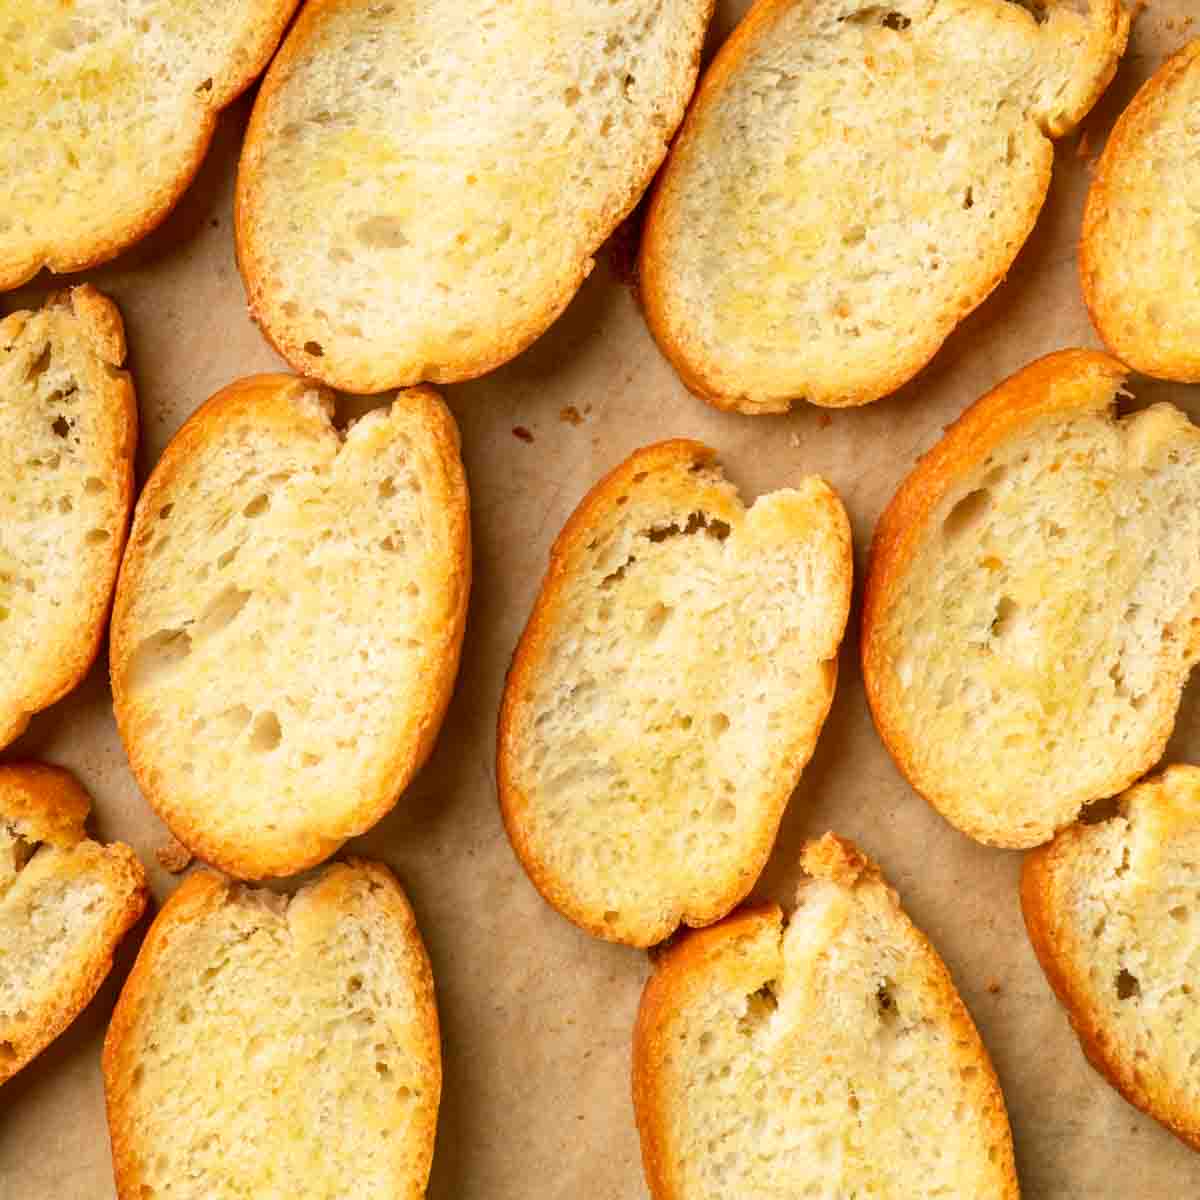 Perfectly toasted crostini slices with golden brown edges.